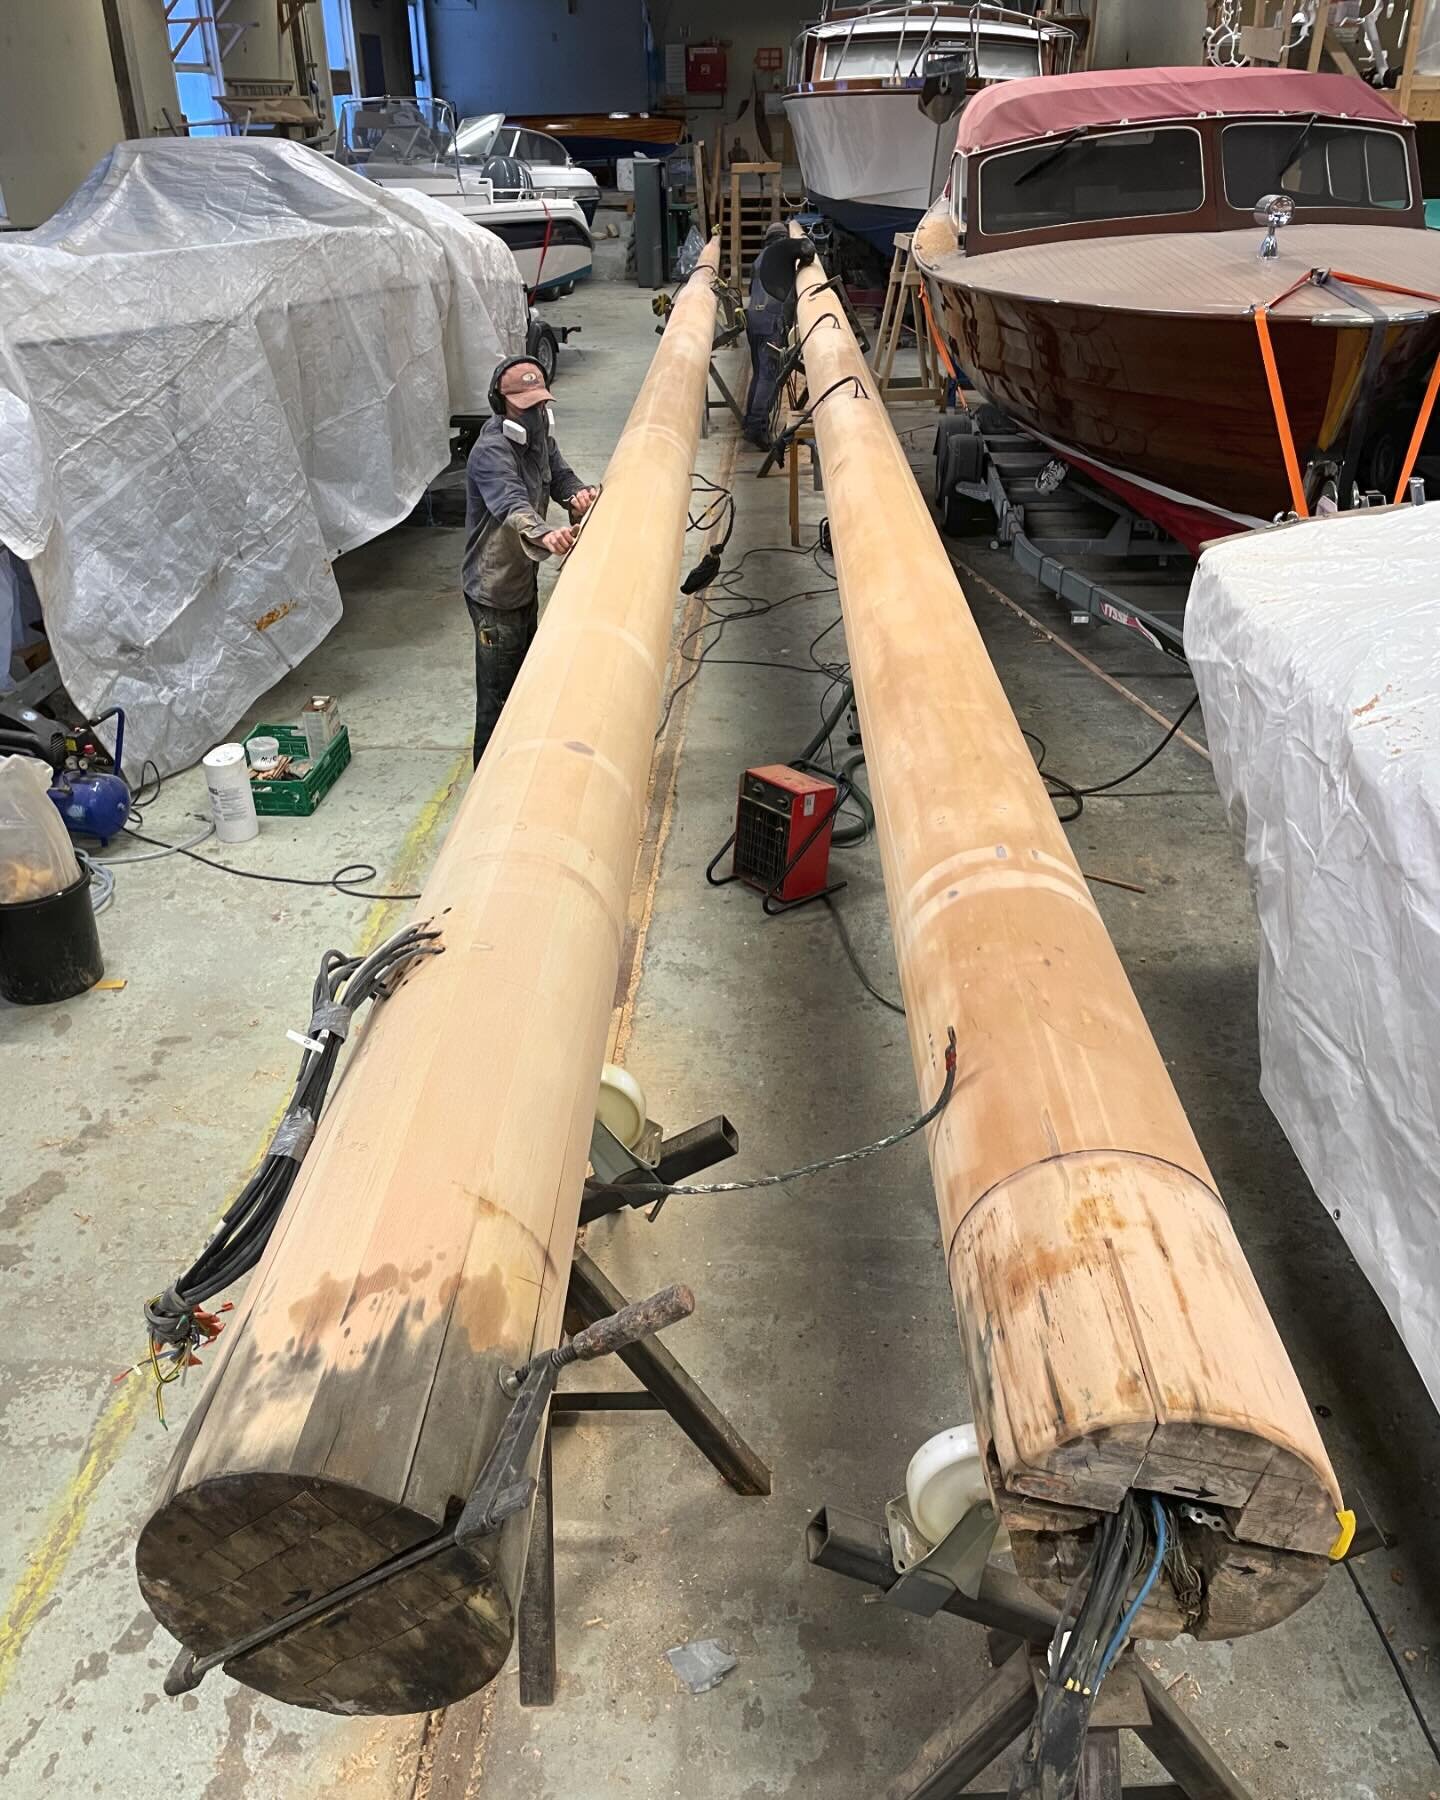 Two large masts are being repaired, sanded and varnished. 
&bull;
&bull;
&bull;
#woodenboat #boatbuilding #restoration #workshop #tools #boat #sailing #tallships #ship #woodworking #diy #sanding #repair #foryou #explorepage #oslo #norway #yachting #v